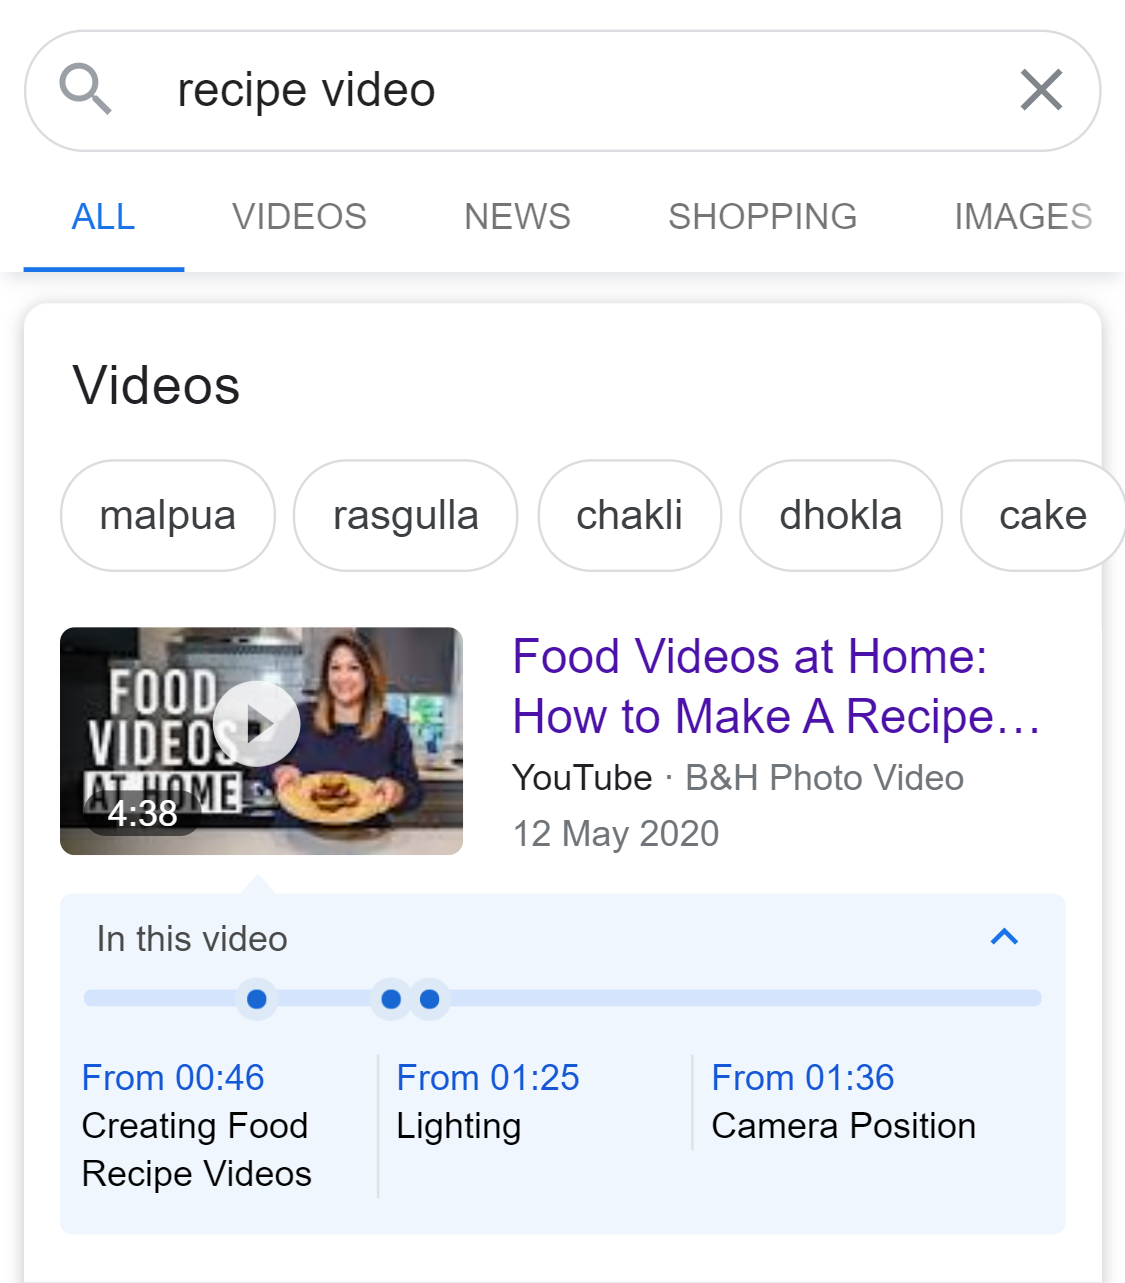 Example of structured data used in a video search result